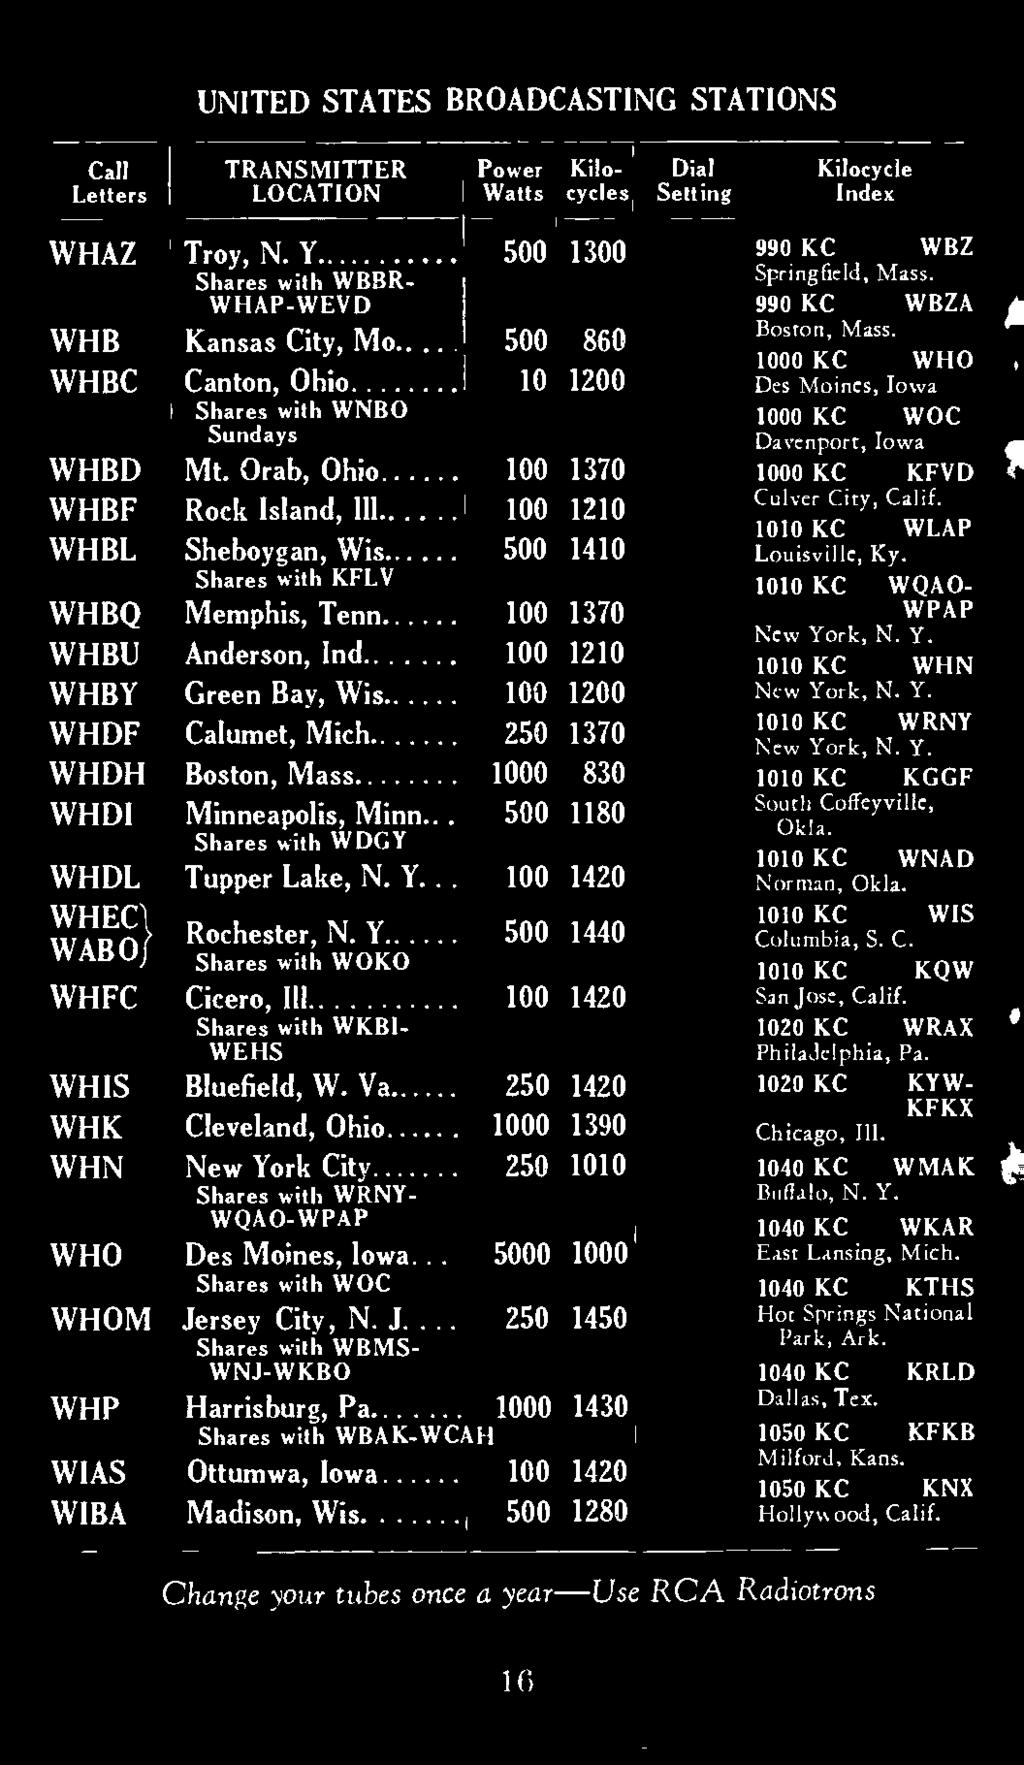 WHBU Anderson, Ind. WHBY Green Bay, Wis. WHDF Calumet, Mich. 250 WHDH Boston, Mass 0 WHDI Minneapolis, Minn Shares with WDGY WHDL Tupper Lake, N. Y WHEC} Rochester, N. Y. WABOShares with WOKO WHFC Cicero, Ill.